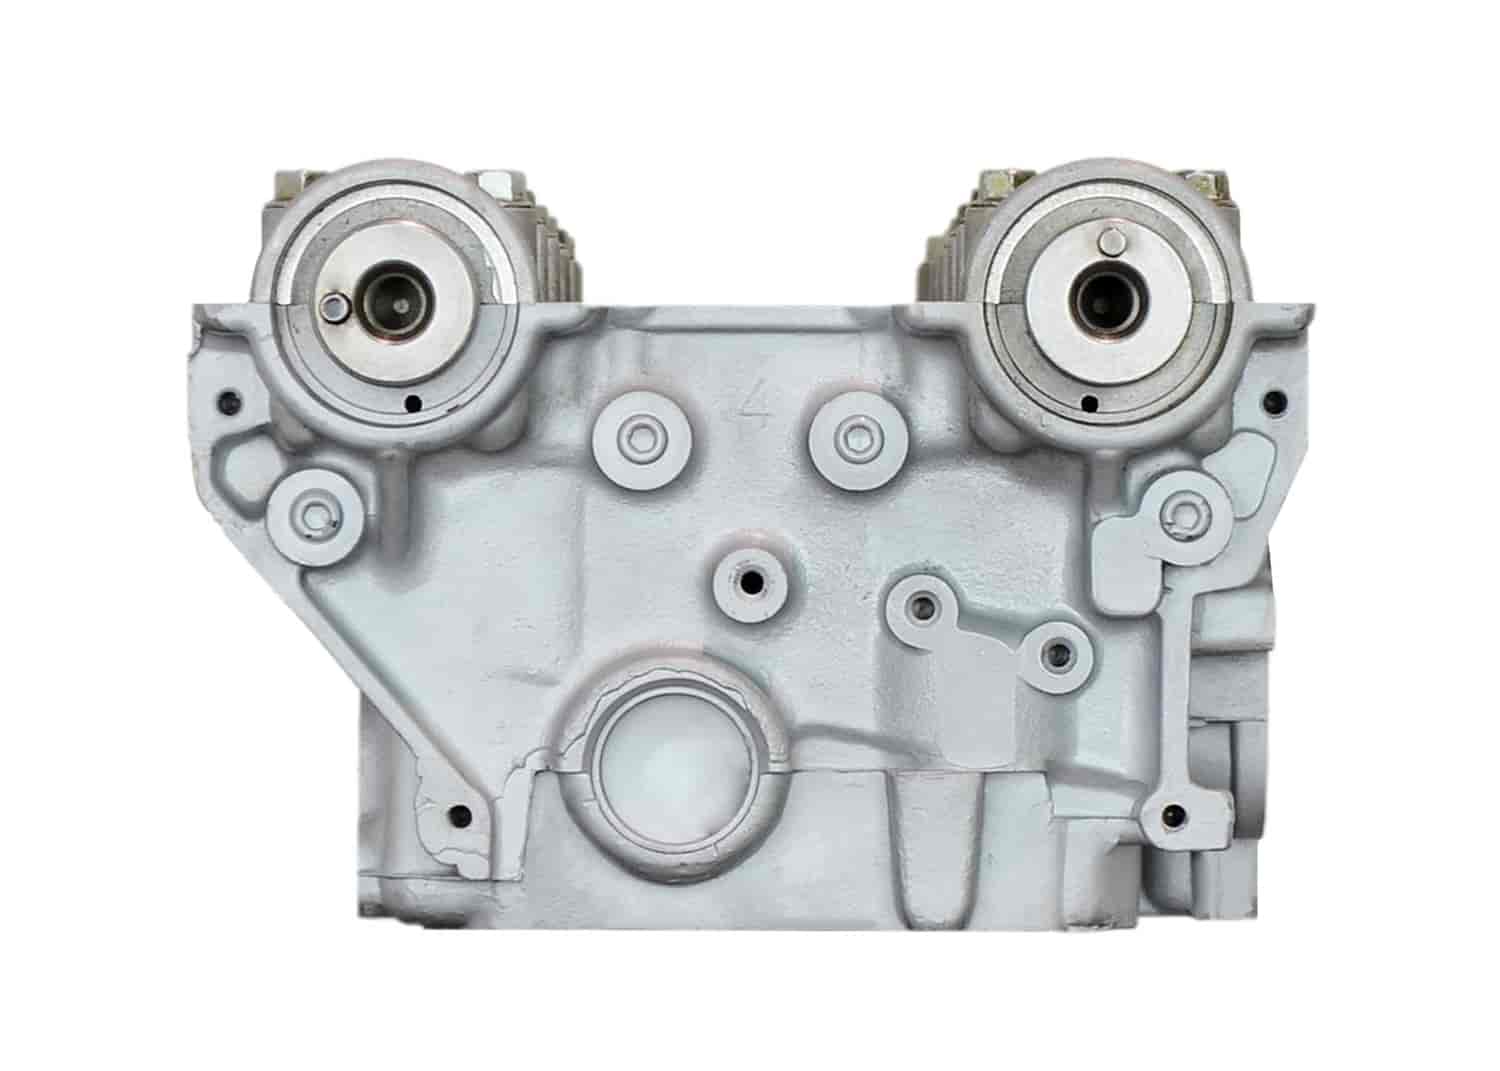 Remanufactured Cylinder Head for 1996-1998 Hyundai Sonata with 2.0L L4 G4CP